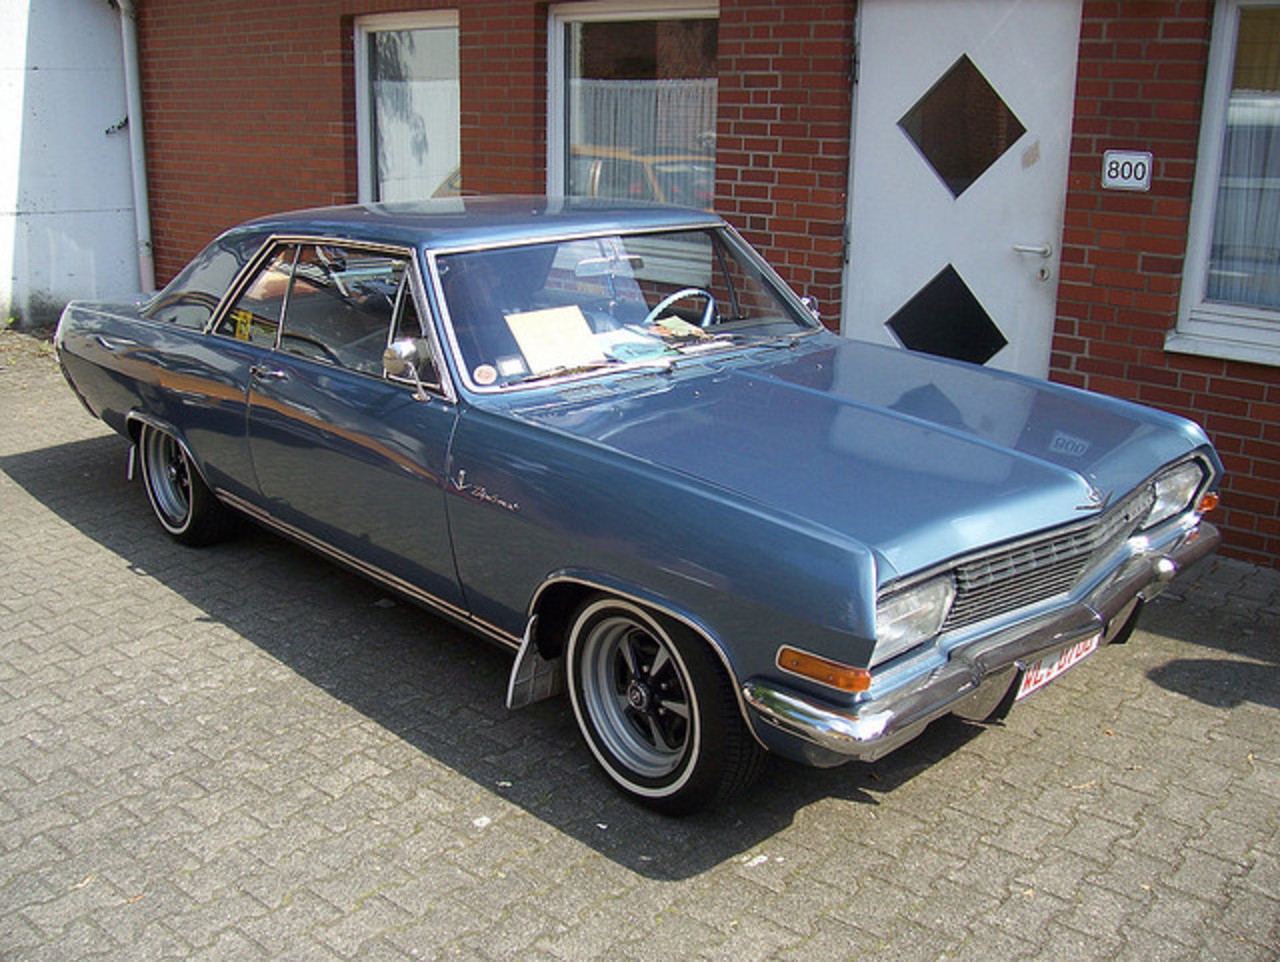 Opel Diplomat A Coupe 5.3l V8 1966 -1- | Flickr - Photo Sharing!